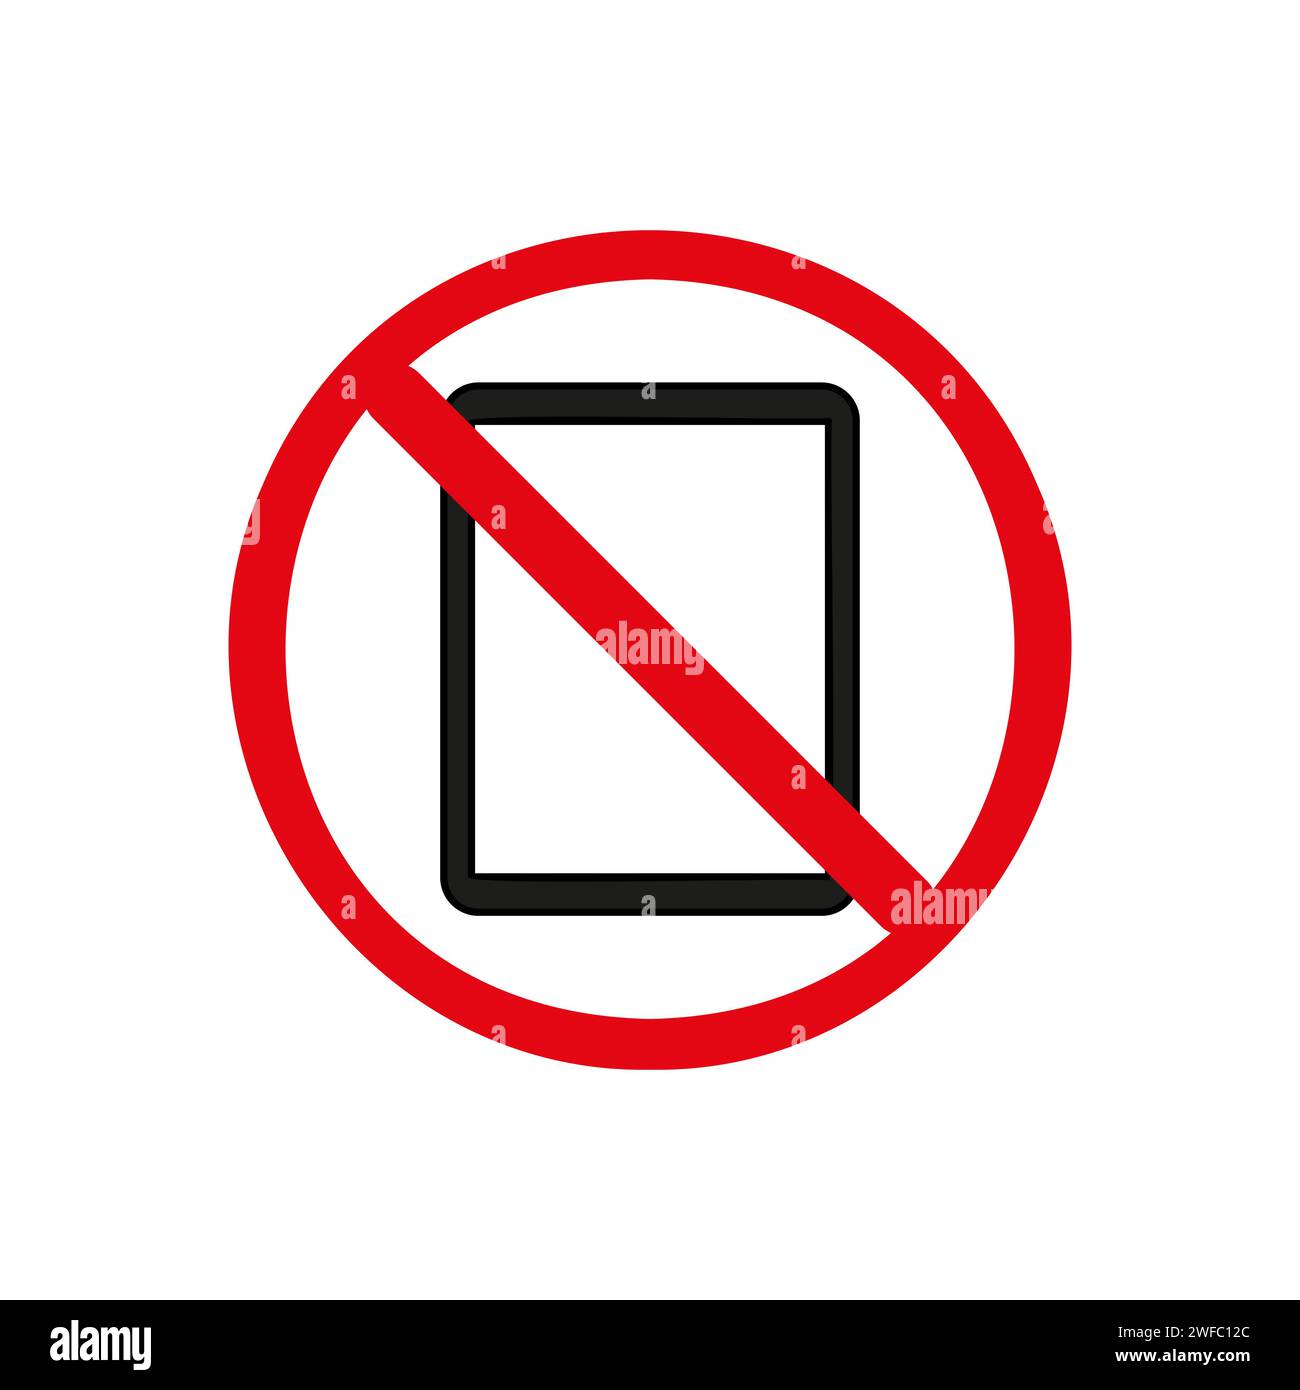 No gadgets sign. Tablet icon. Red circle. Forbidden concept. Public information. Vector illustration. Stock image. EPS 10. Stock Vector